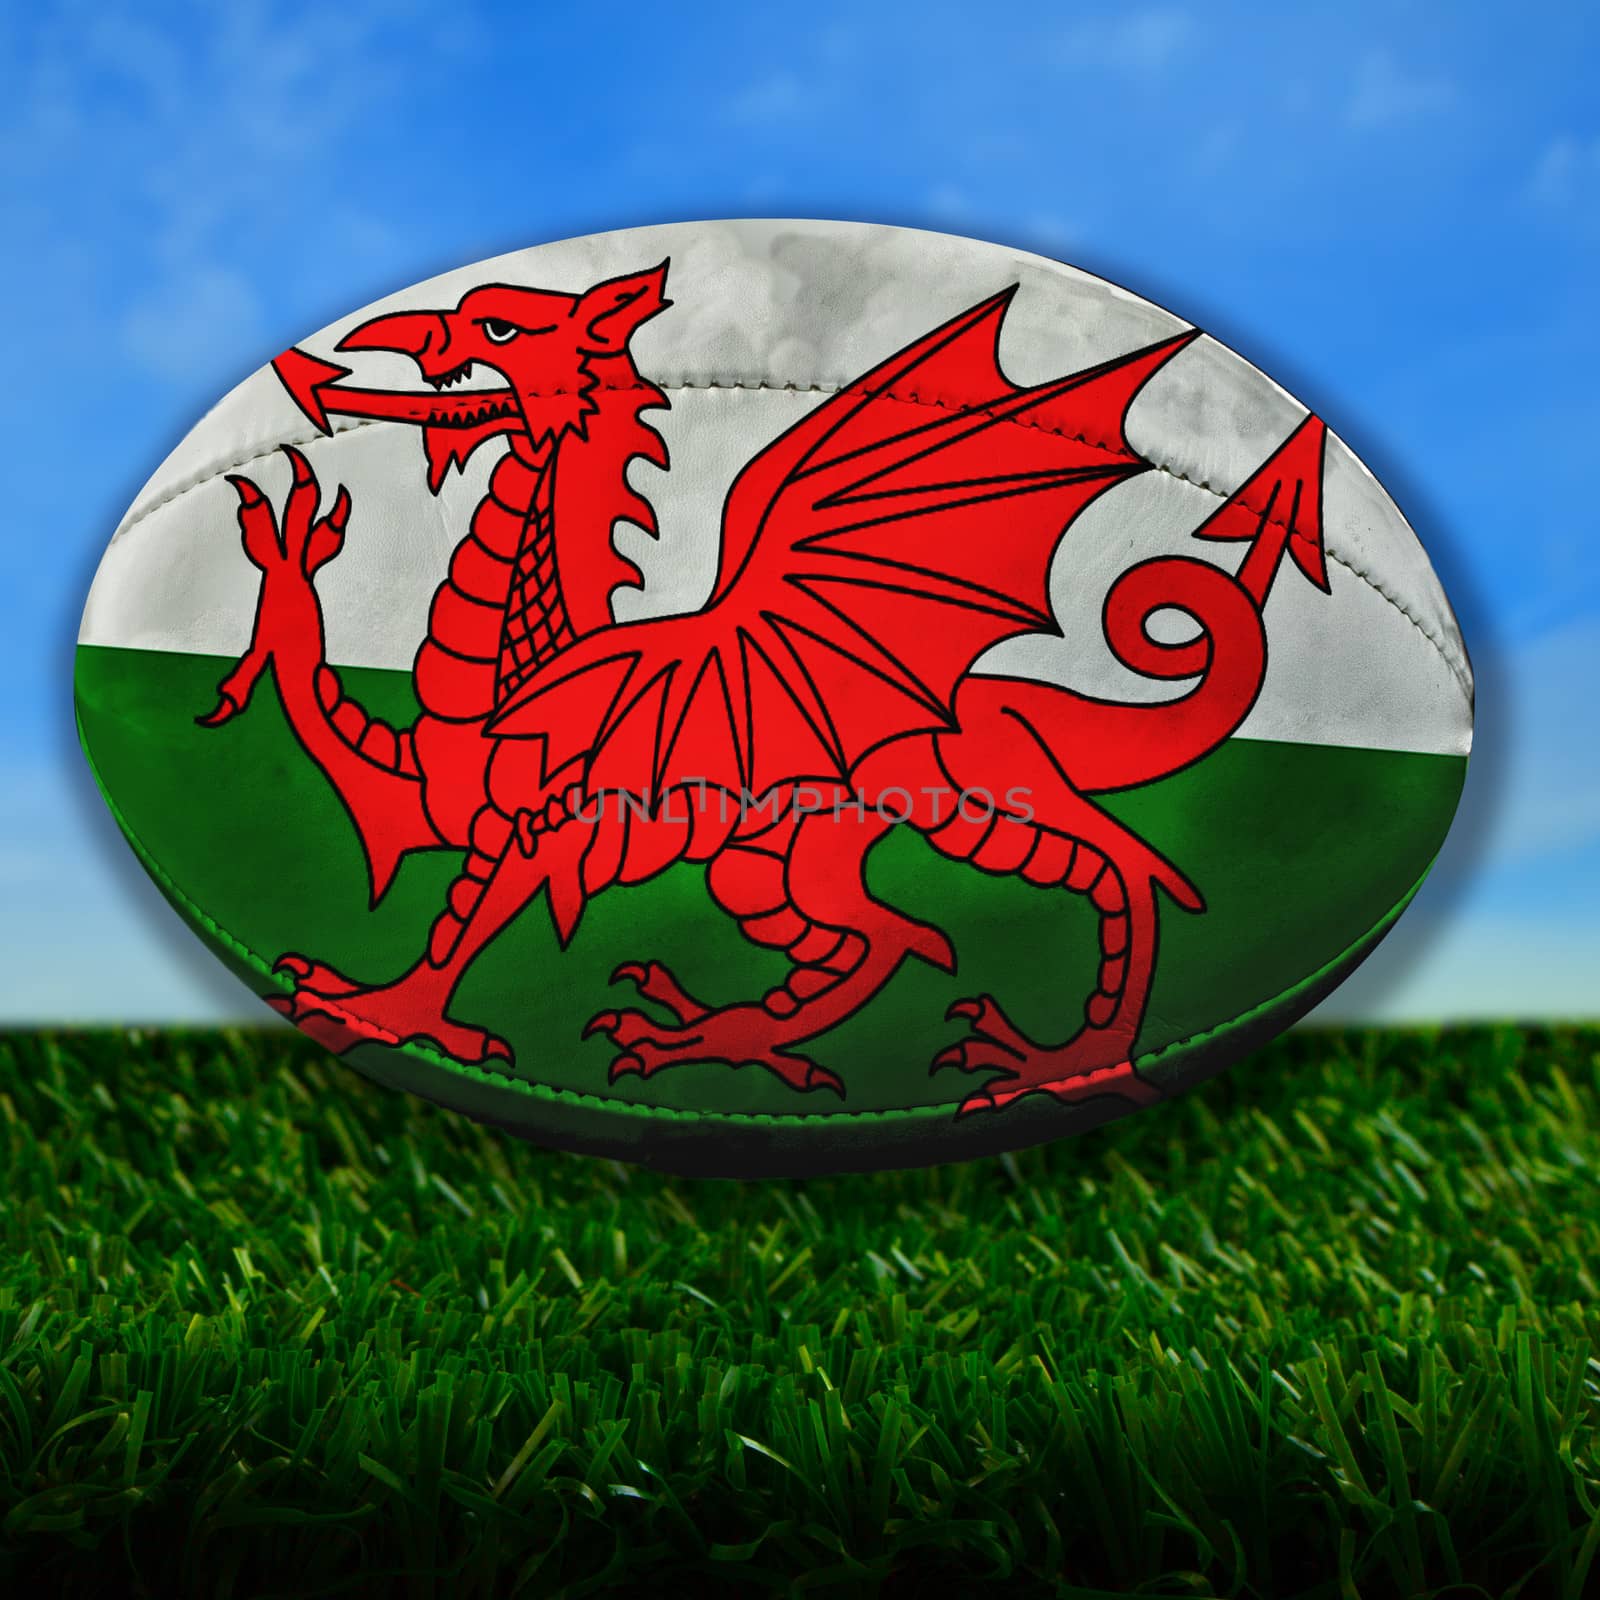 Rugby ball with Wales flag over grass